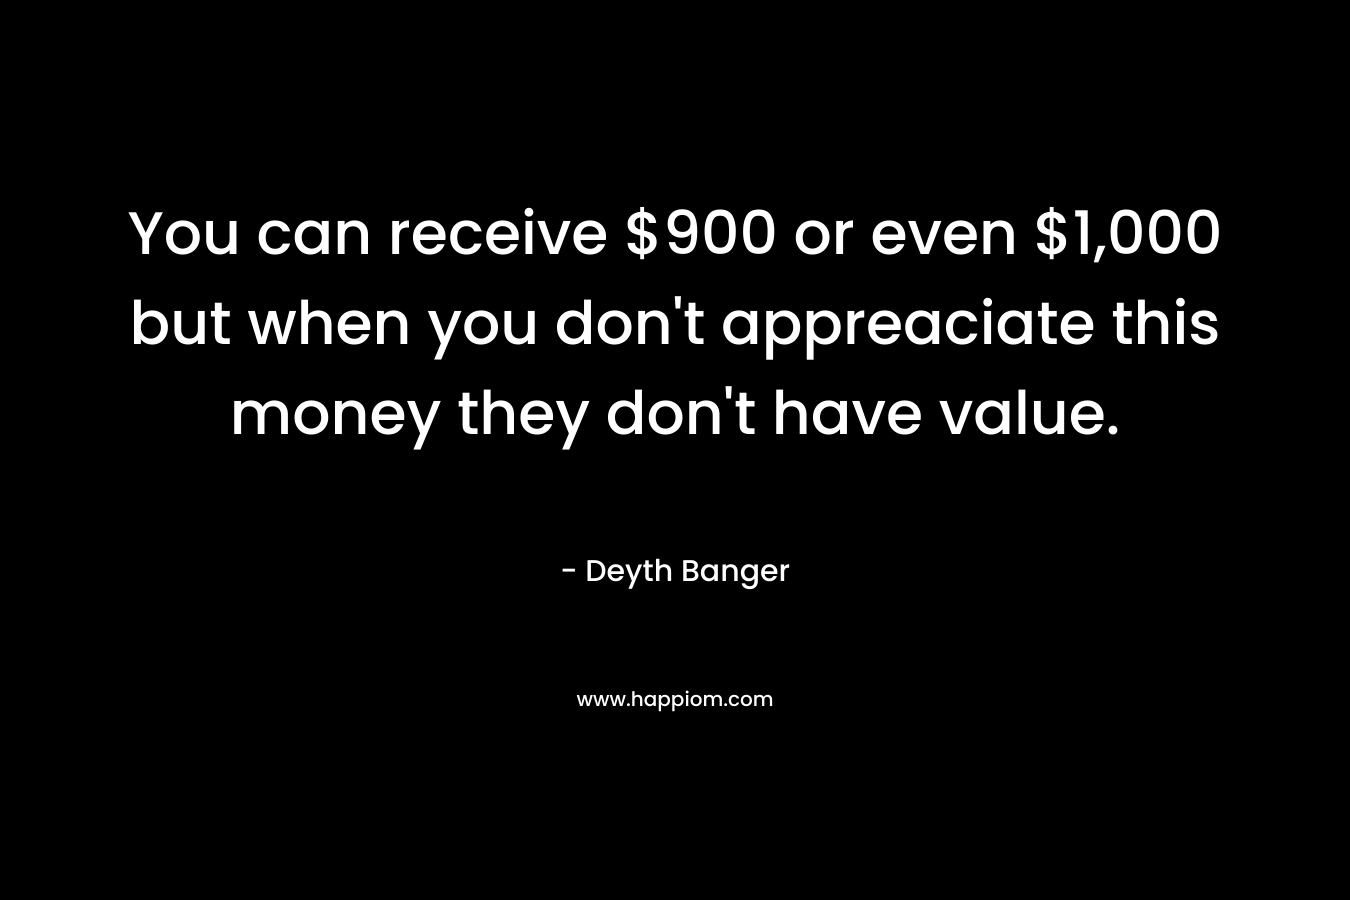 You can receive $900 or even $1,000 but when you don't appreaciate this money they don't have value.